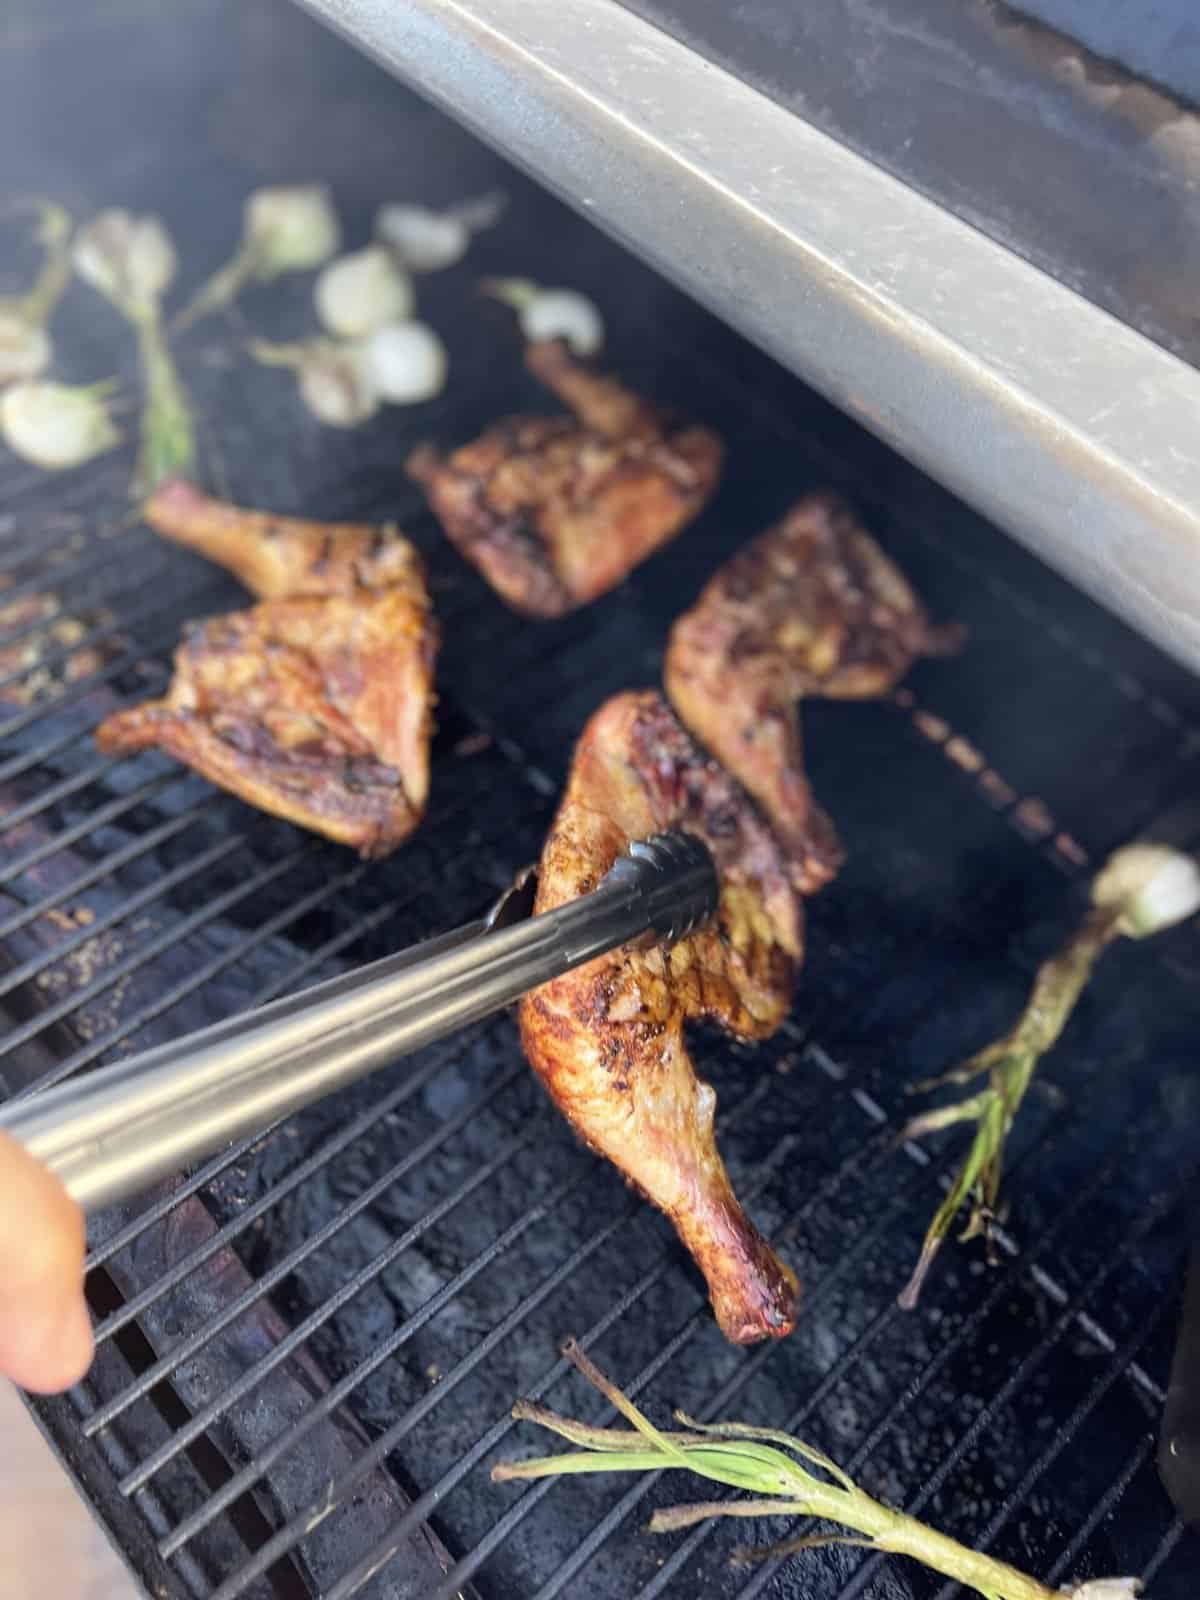 A person is using a spatula to cook chicken legs on a grill.